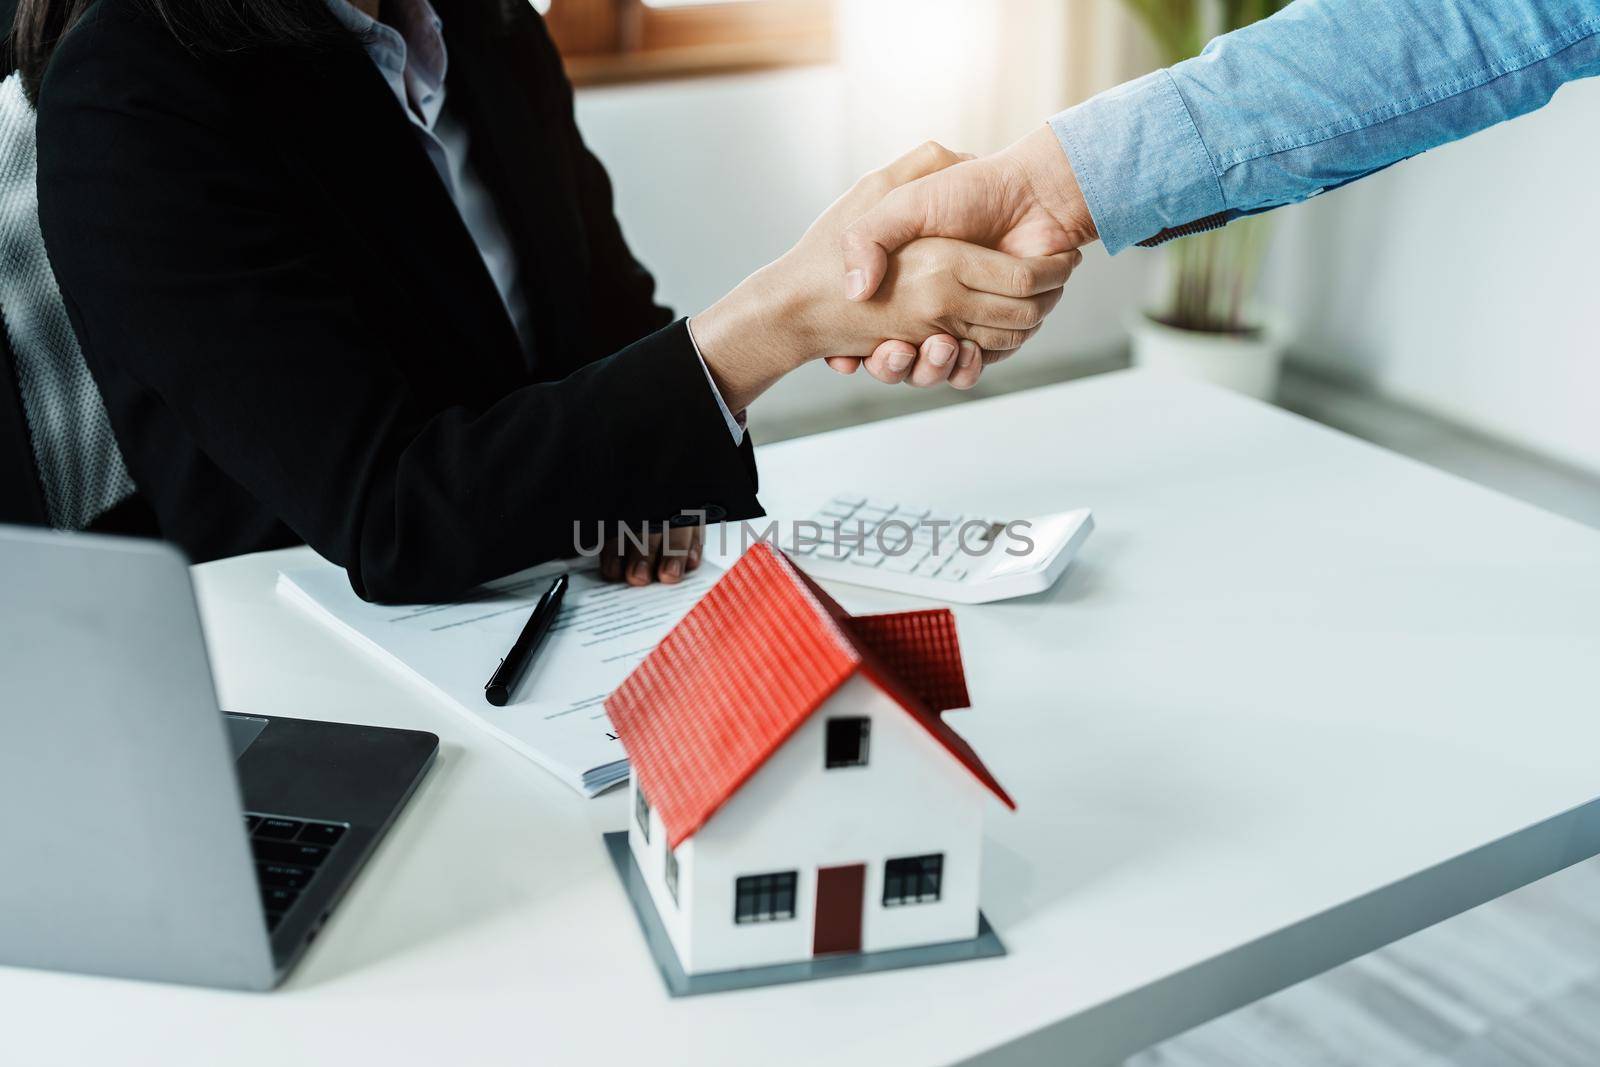 Laws, contracts, mortgages, clients join hands with real estate agents congratulating real estate agents on home and land purchase agreements with insurance to reduce risks during home installments.